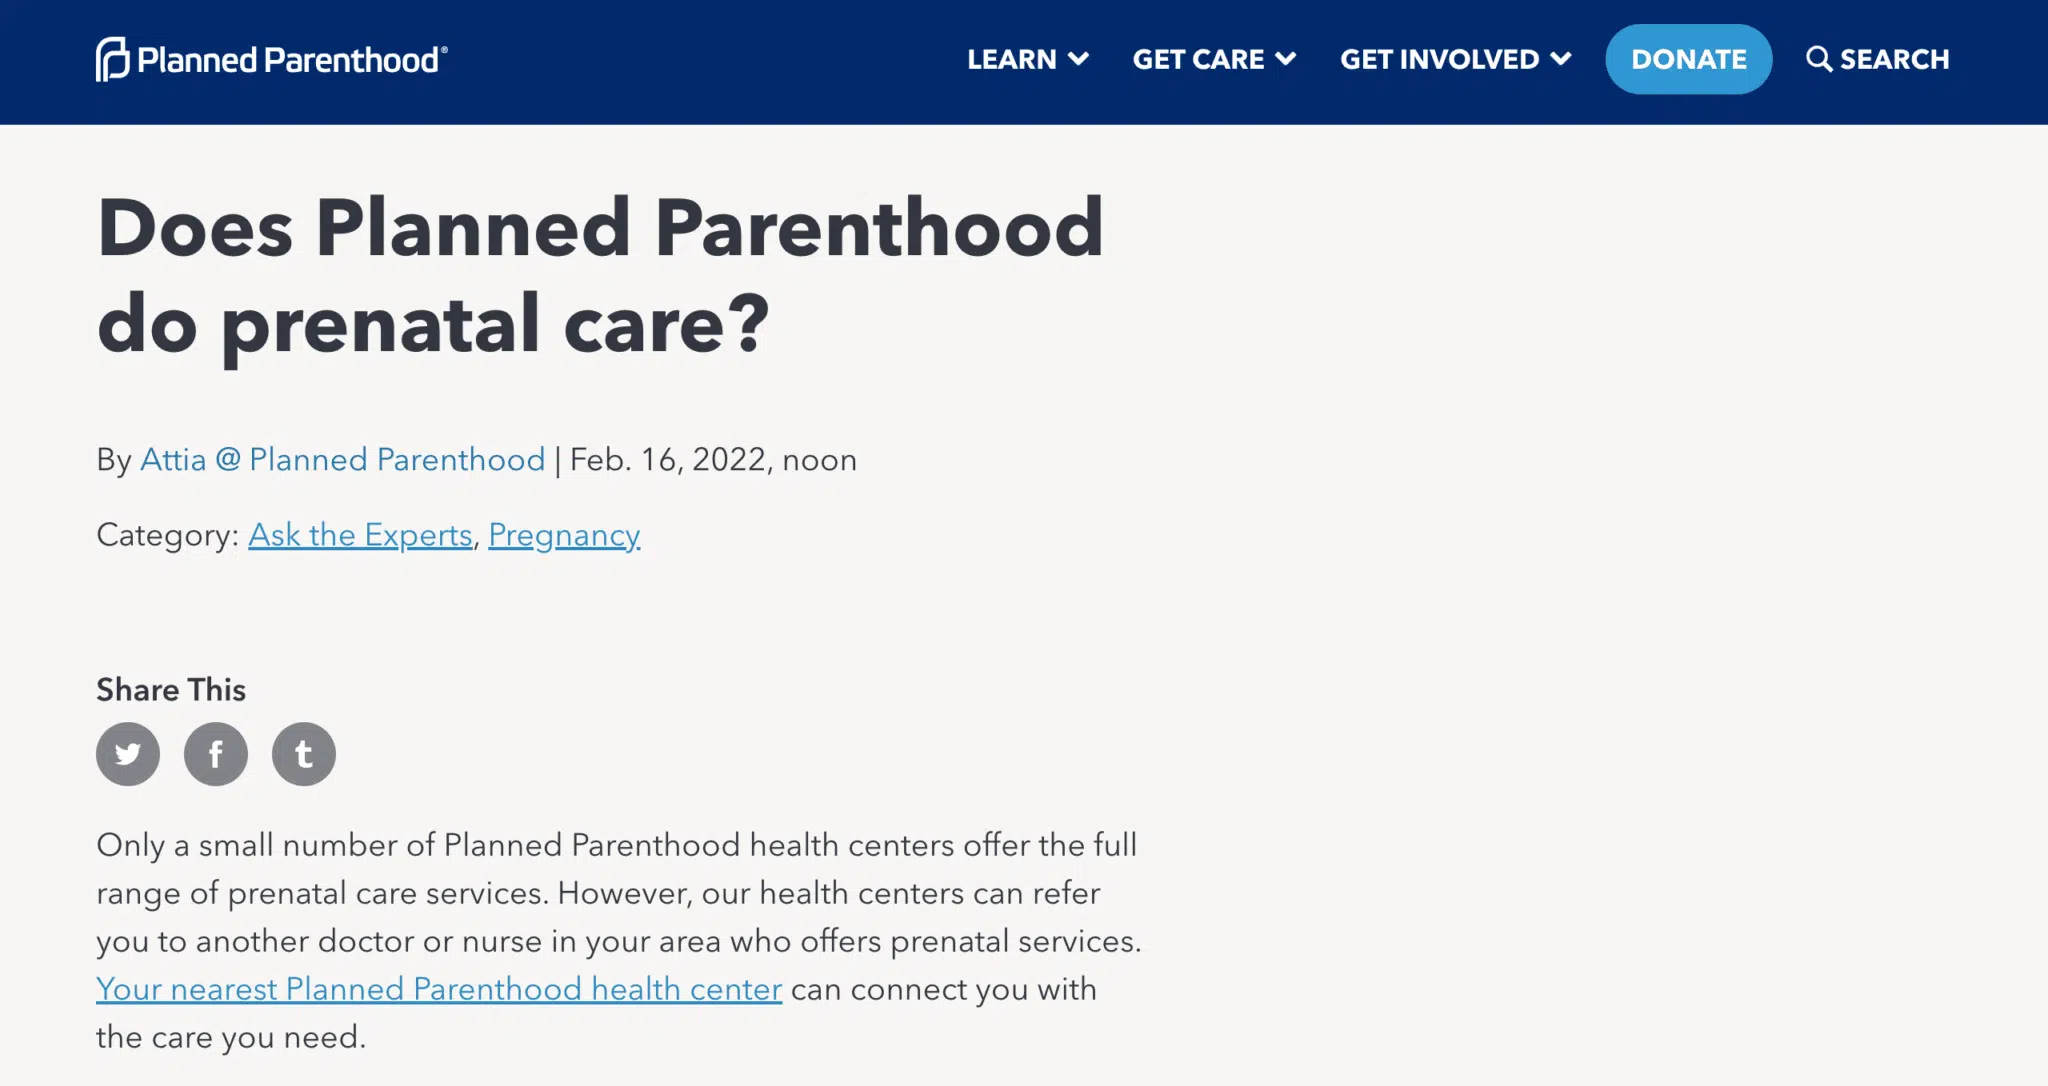 how many planned parenthood clinics offer prenatal care - screenshot from Planned Parenthood's website article 'Does Planned Parenthood Do Prenatal Care'